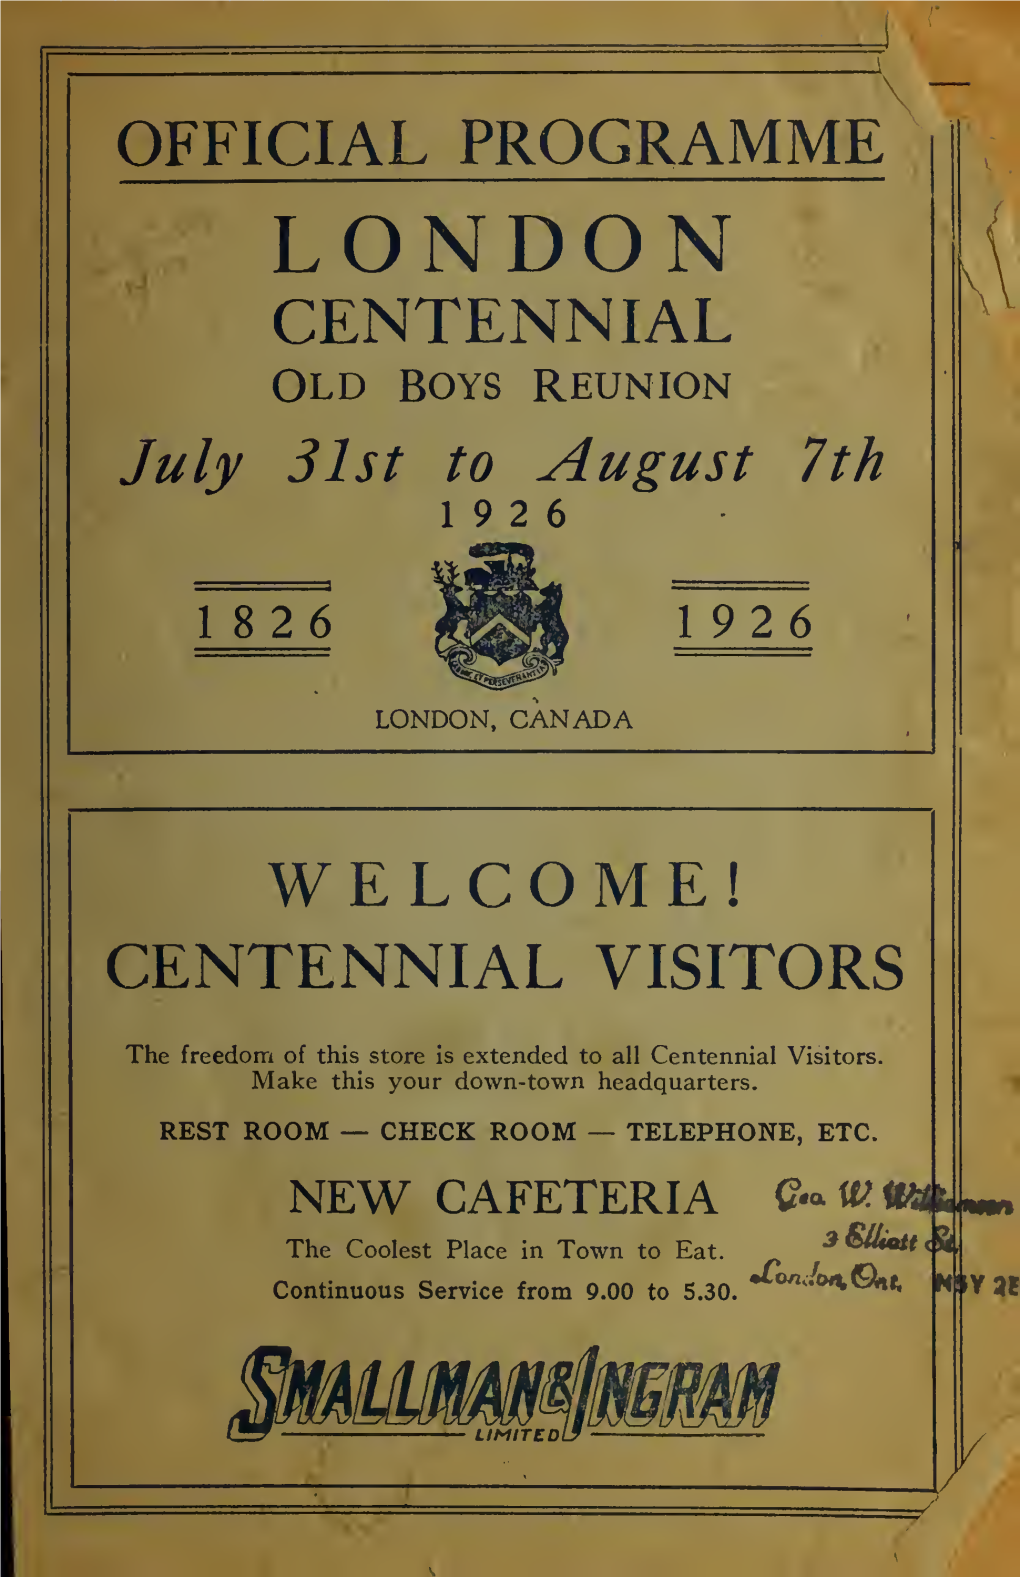 OFFICIAL PROGRAMME LONDON CENTENNIAL OLD BOYS REUNION July 31St to August 7Th 19 2 6